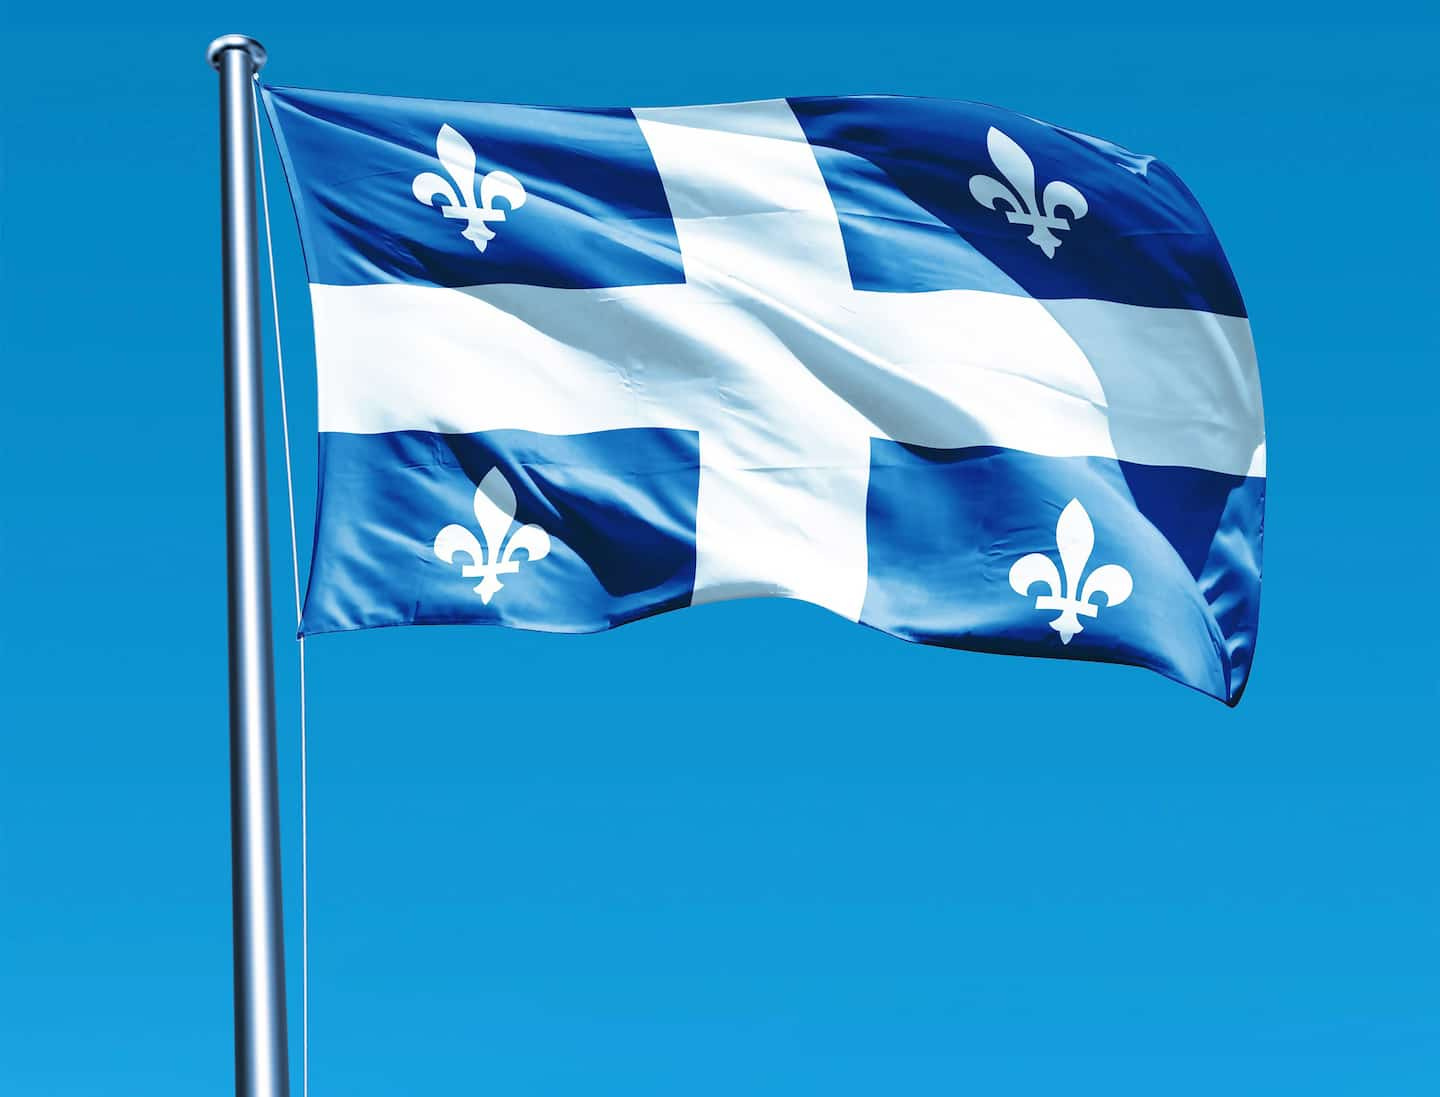 My Quebec is open and welcoming